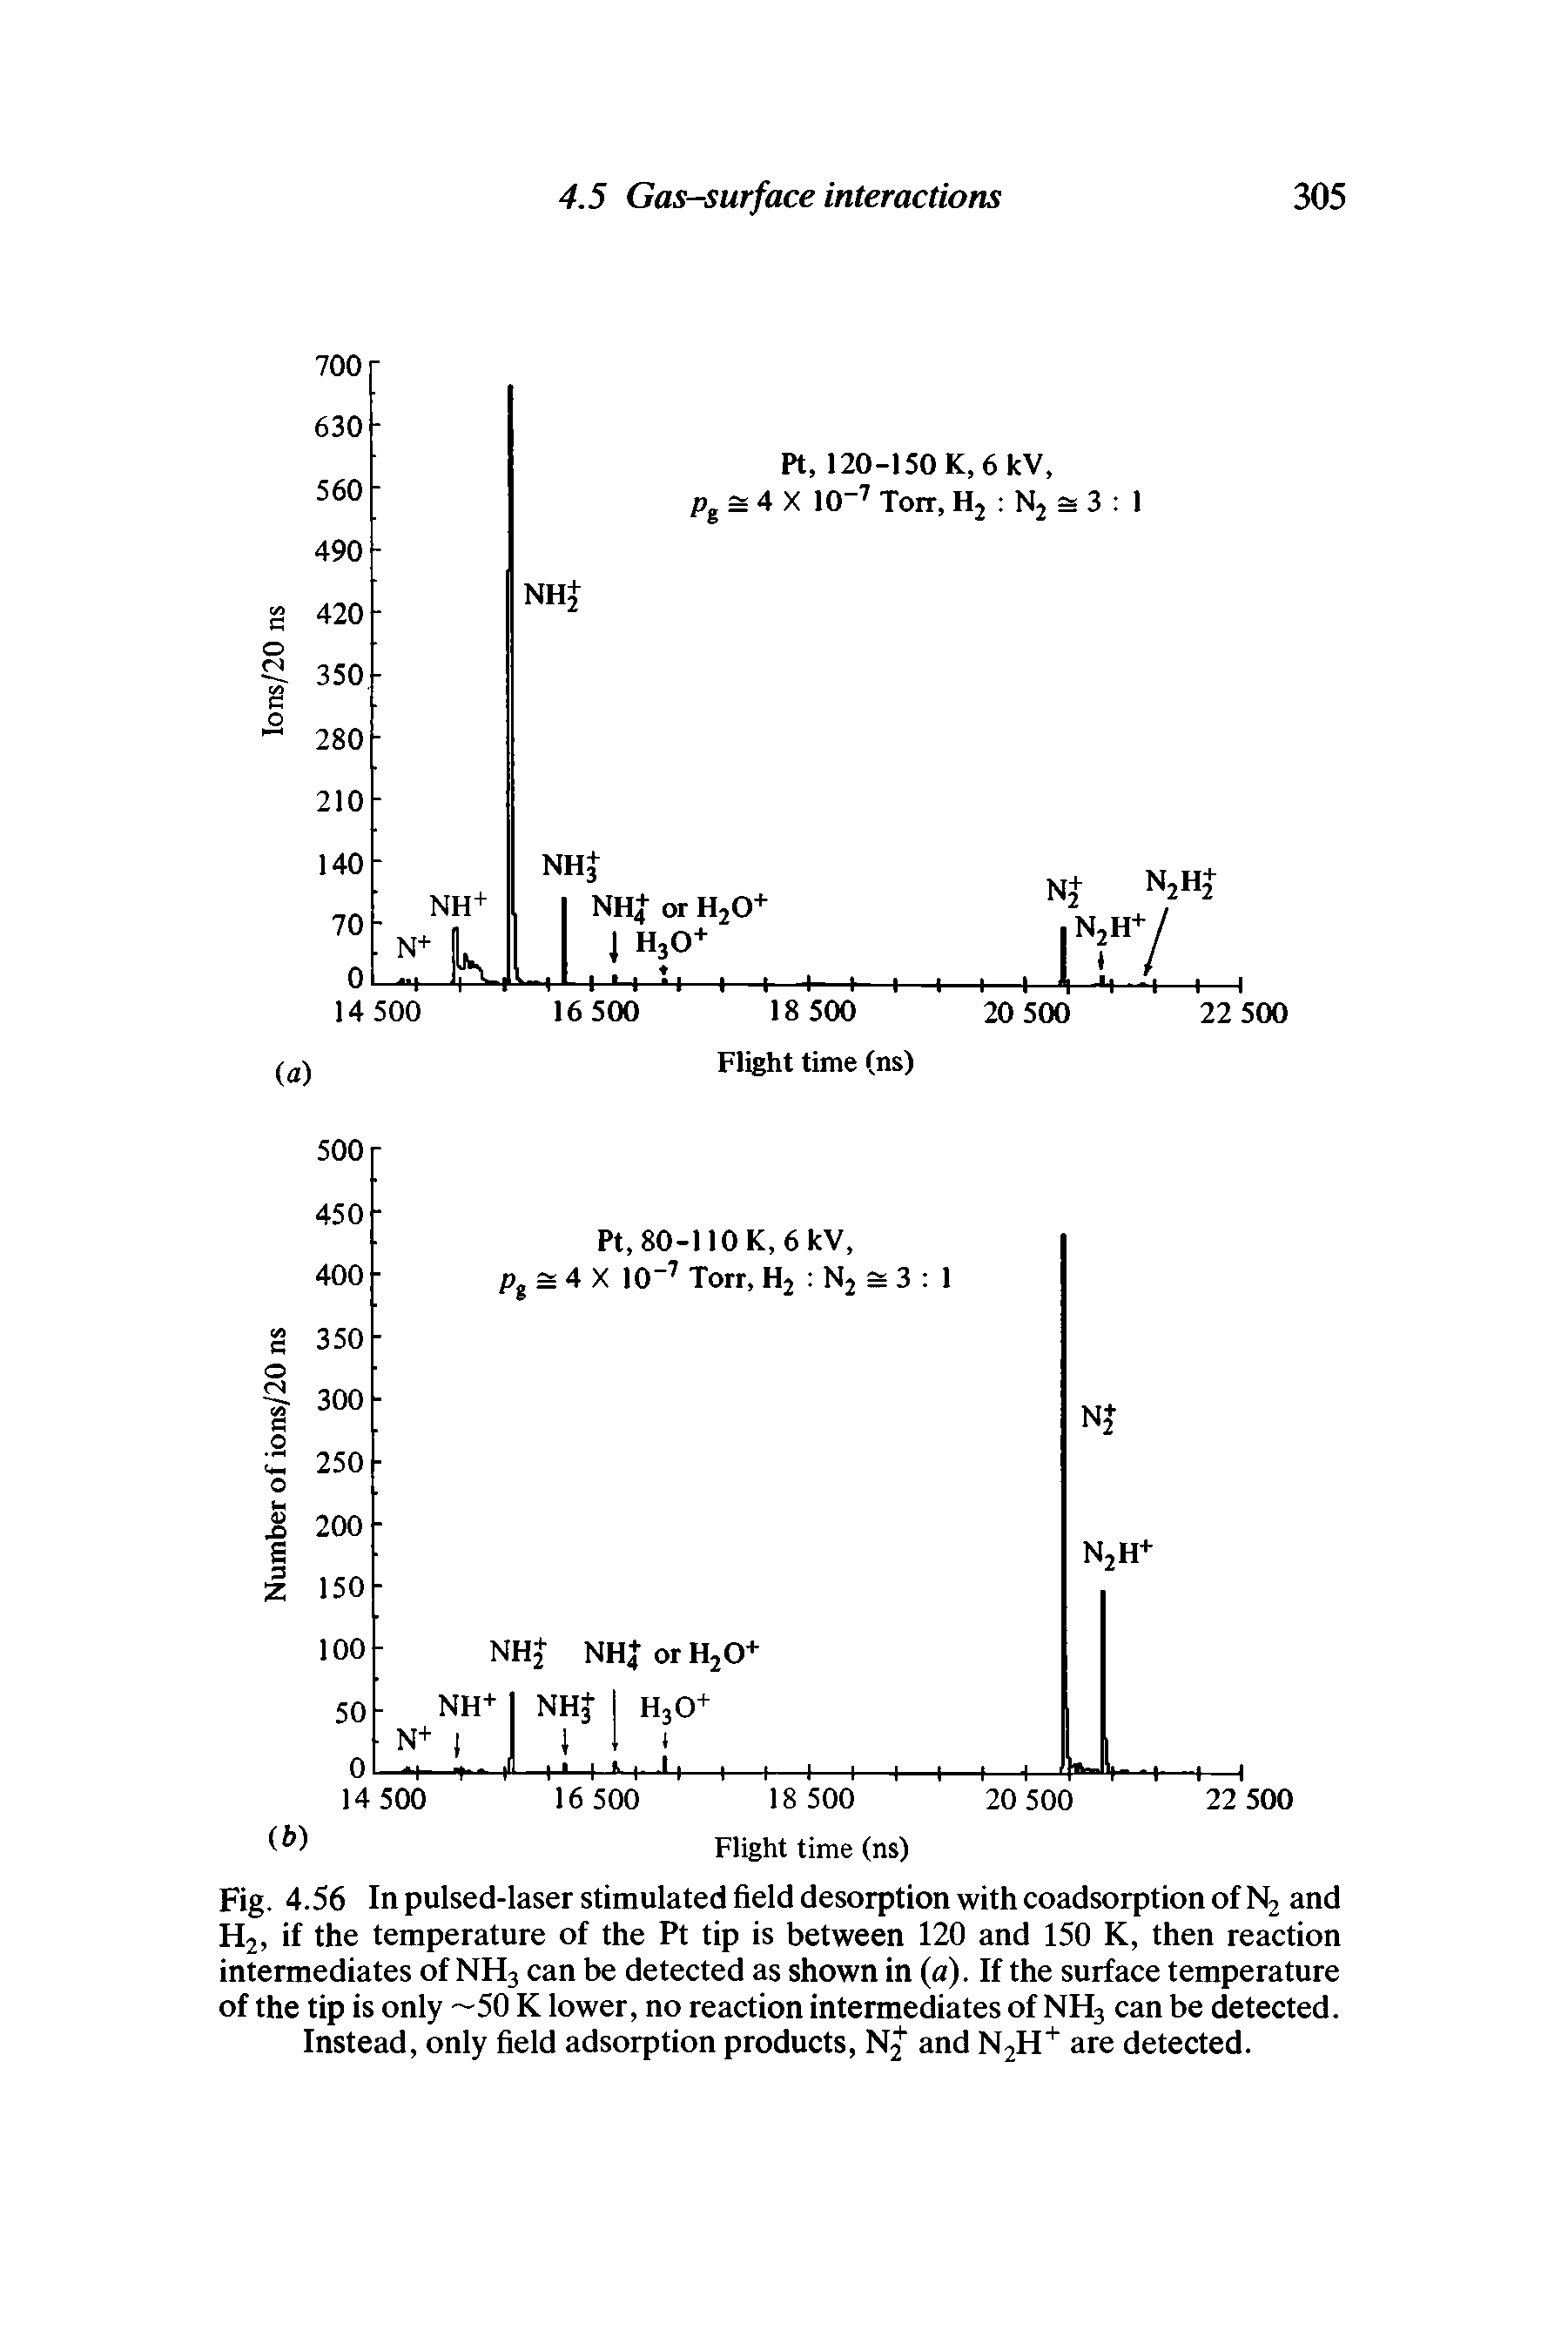 Fig. 4.56 In pulsed-laser stimulated field desorption with coadsorption of N2 and H2, if the temperature of the Pt tip is between 120 and 150 K, then reaction intermediates of NH3 can be detected as shown in (a). If the surface temperature of the tip is only —50 K lower, no reaction intermediates of NH3 can be detected. Instead, only field adsorption products, N2 and N2H+ are detected.